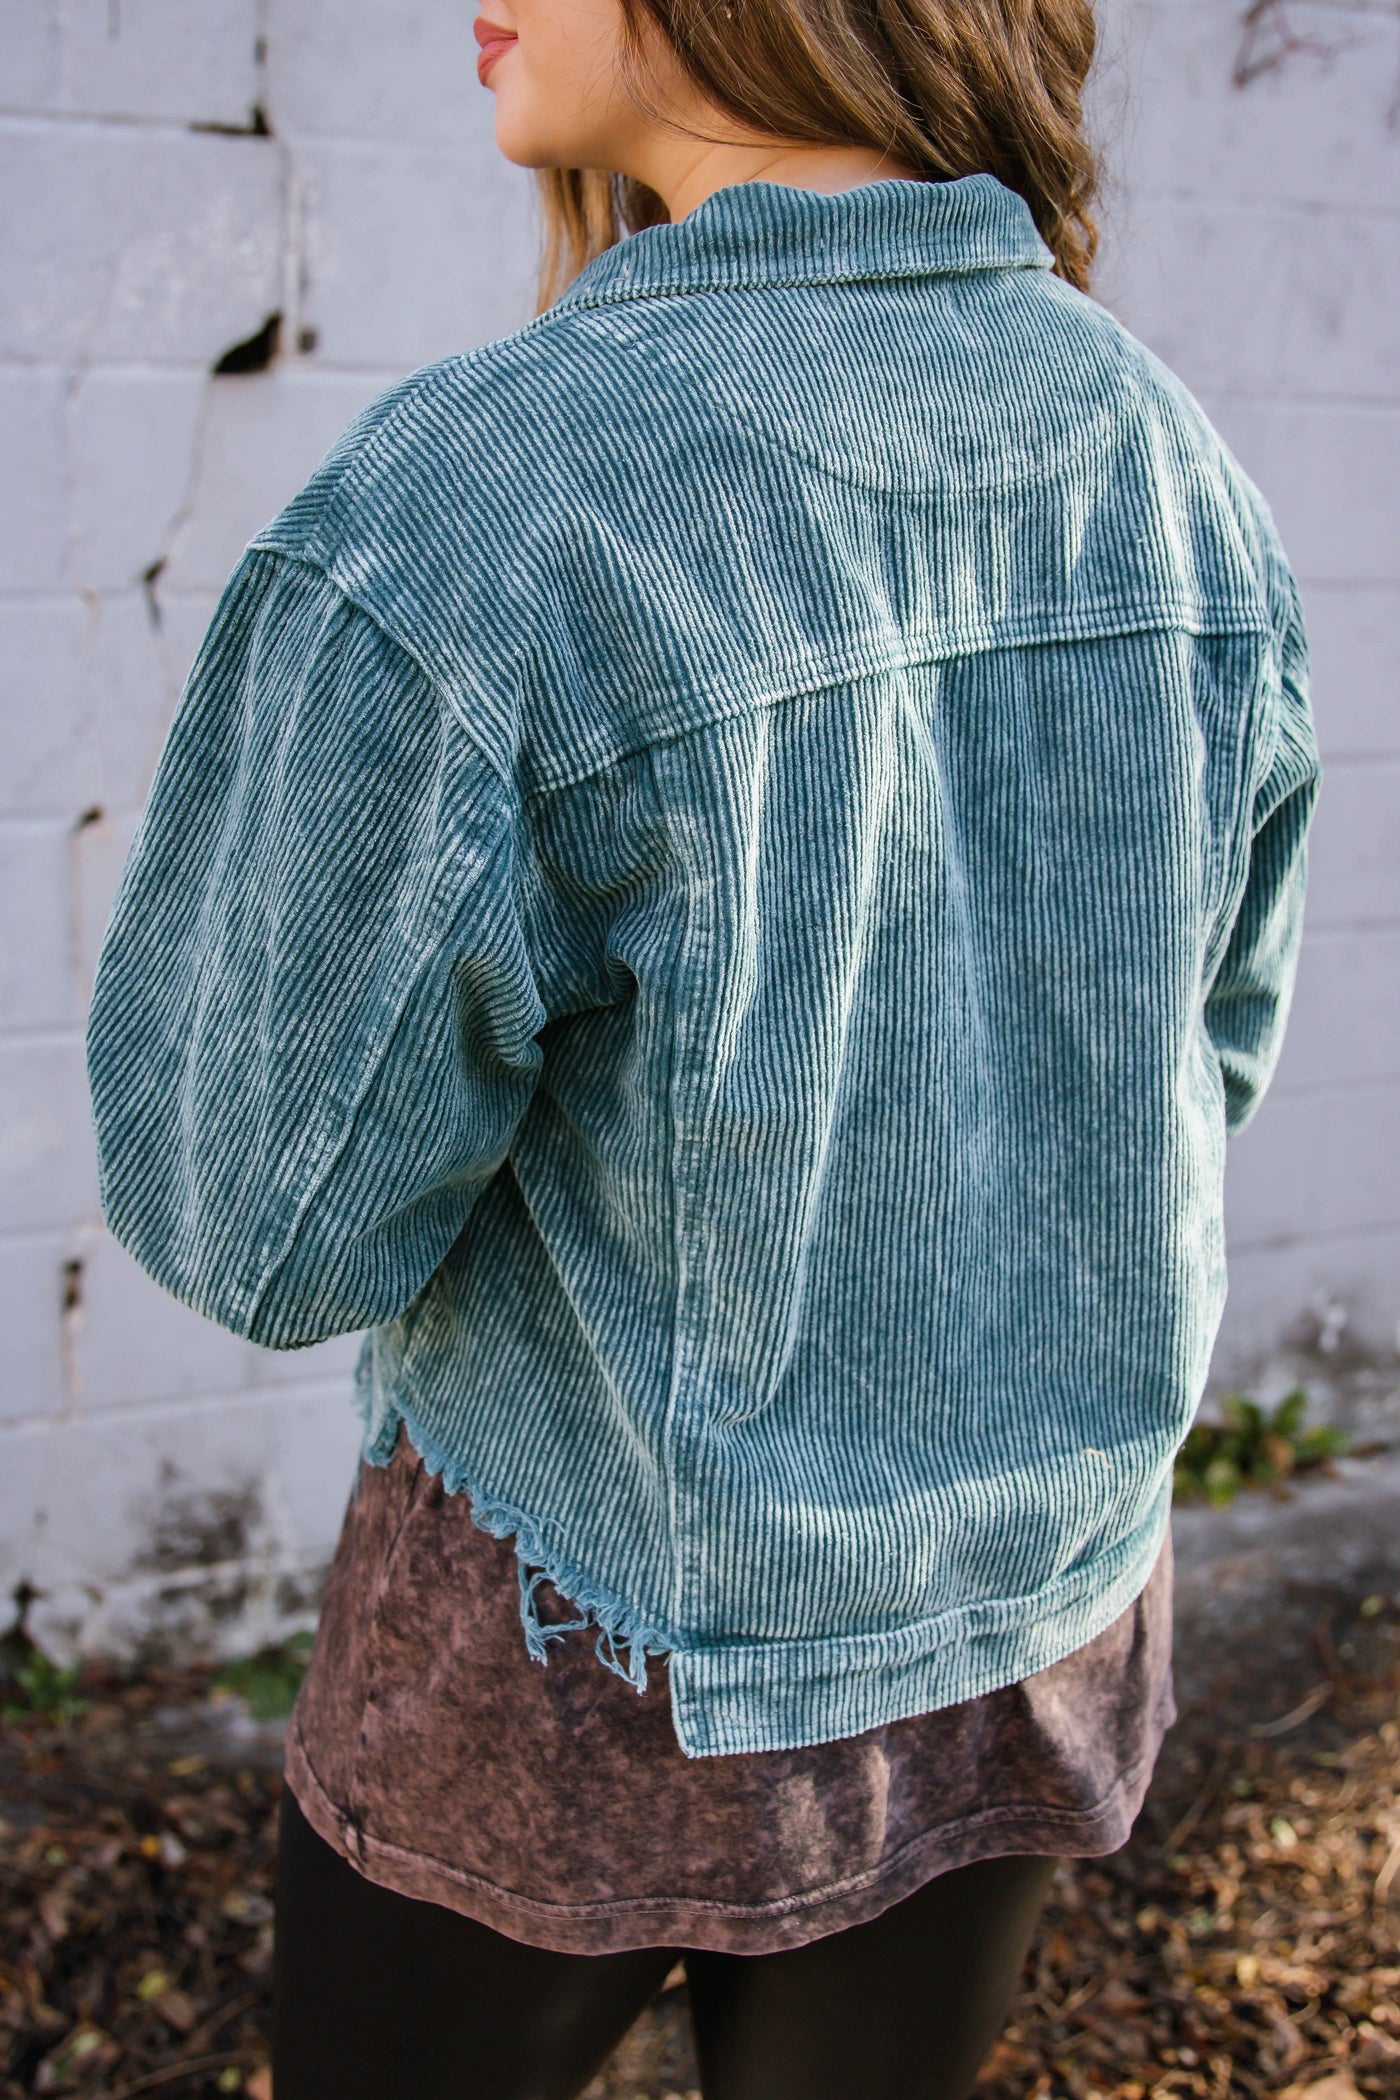 RESTOCK: Ready When You Are Corduroy Jacket-Teal